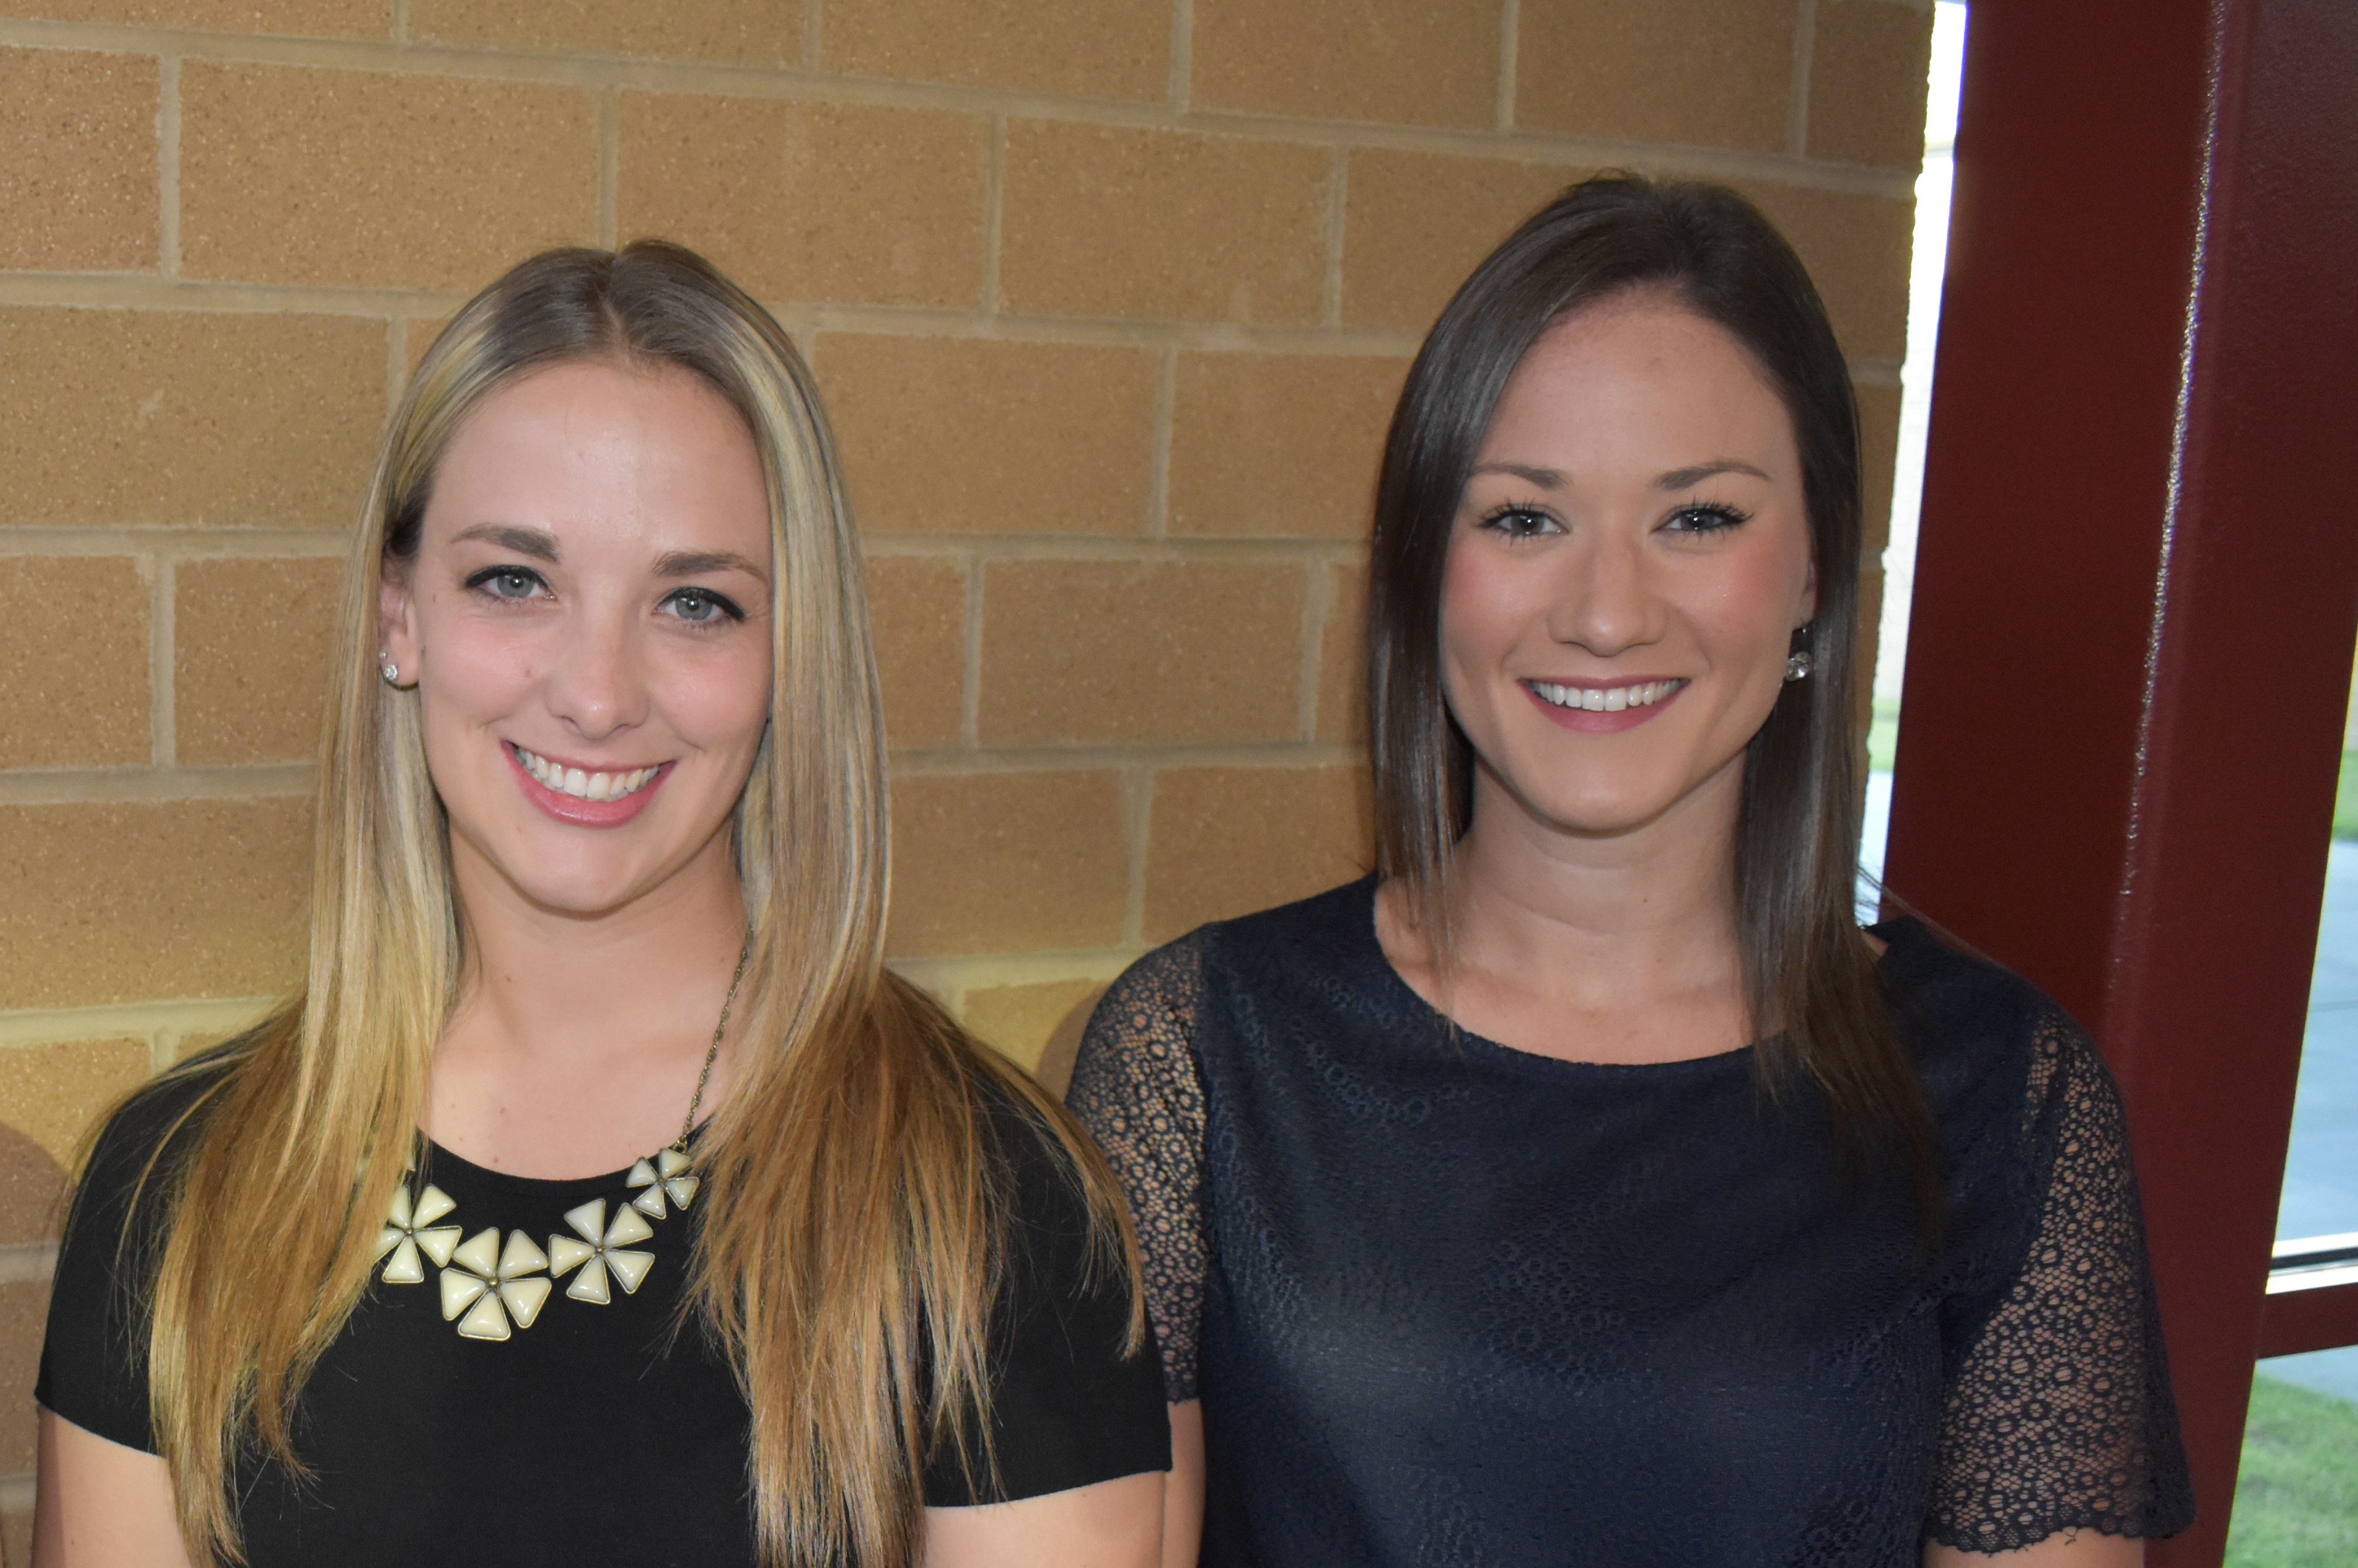 Brookfield Board of Education recently hired Sara Parry, left, and Emily Cricks to teach in the elementary school.